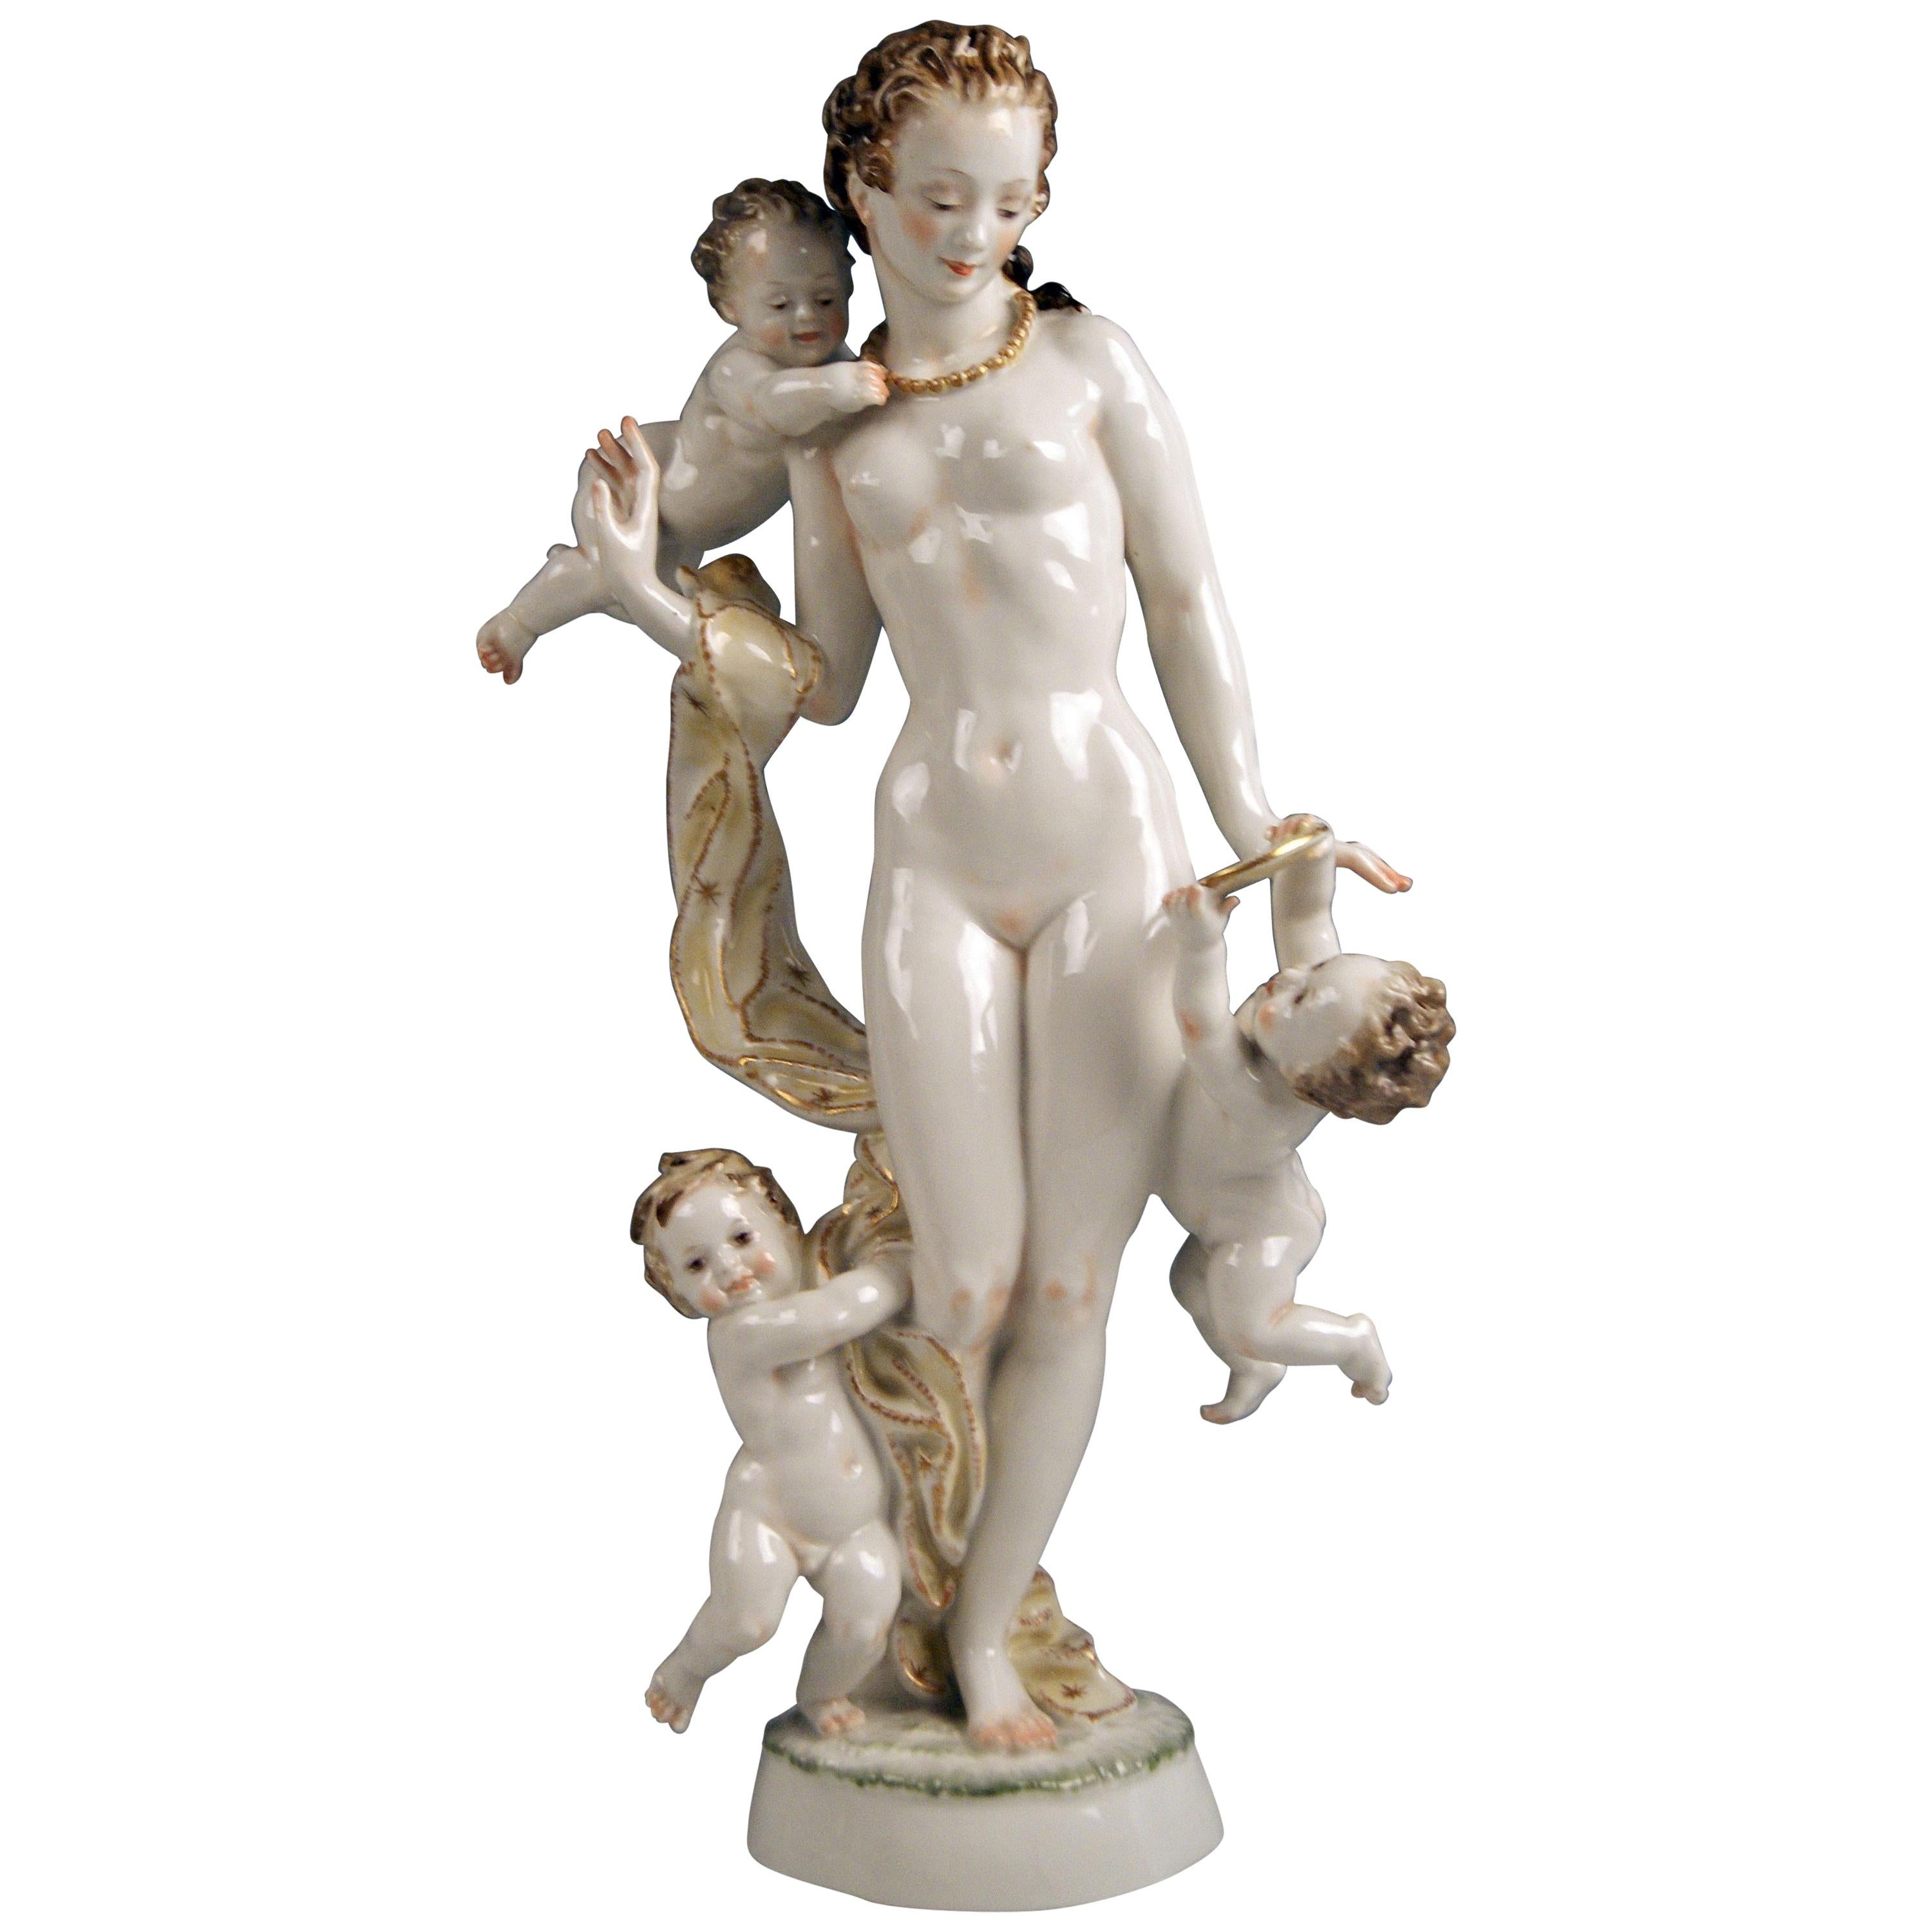 Hutschenreuther Selb Germany Lady Nude Aphrodite with Cherubs, circa 1946-1948